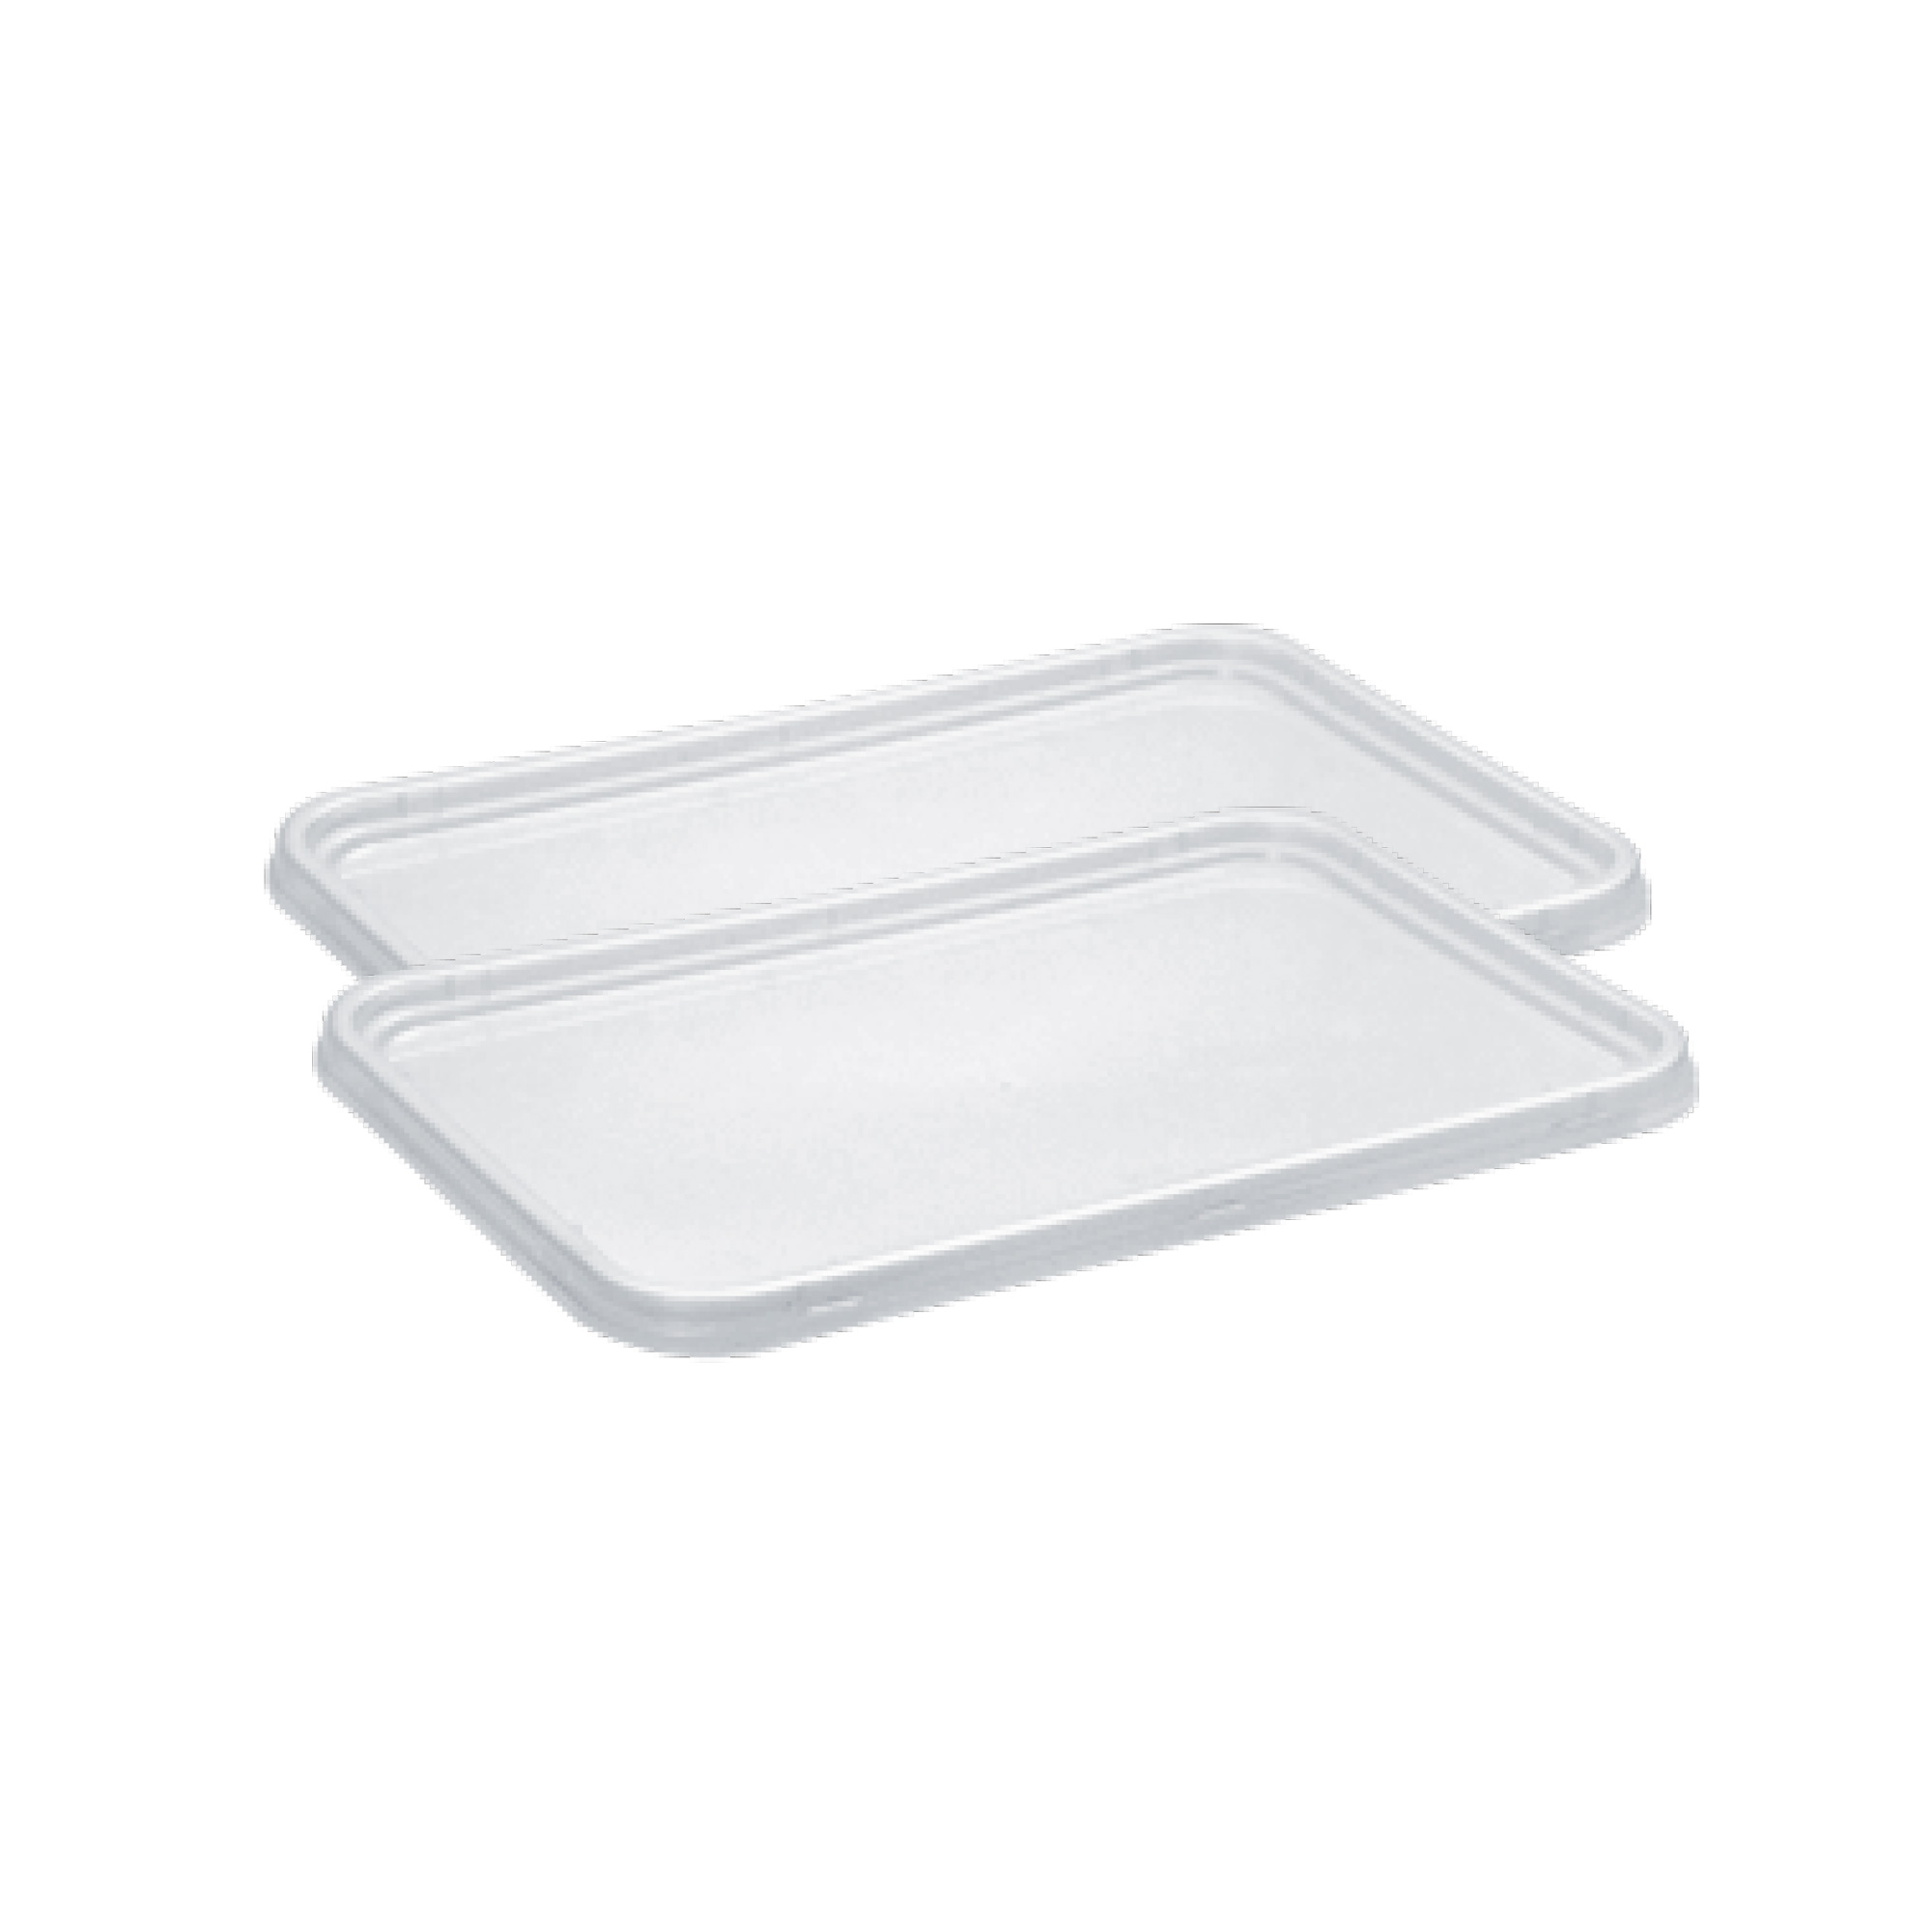 Lids for Microwave Containers (Fits 500 cc, 650 cc, 750 cc, 1000 cc containers)